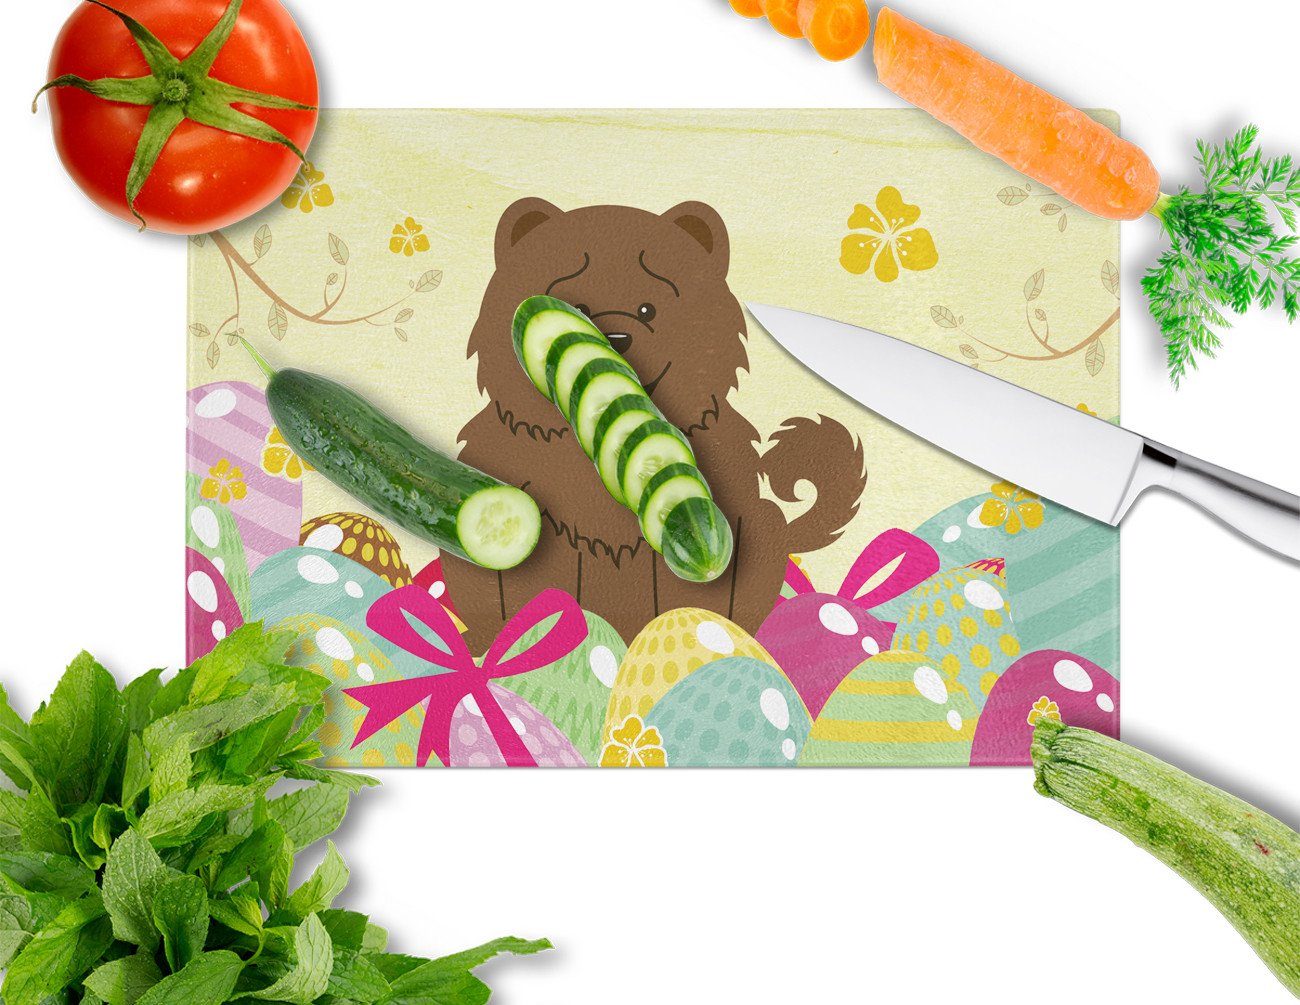 Easter Eggs Chow Chow Chocolate Glass Cutting Board Large BB6141LCB by Caroline's Treasures